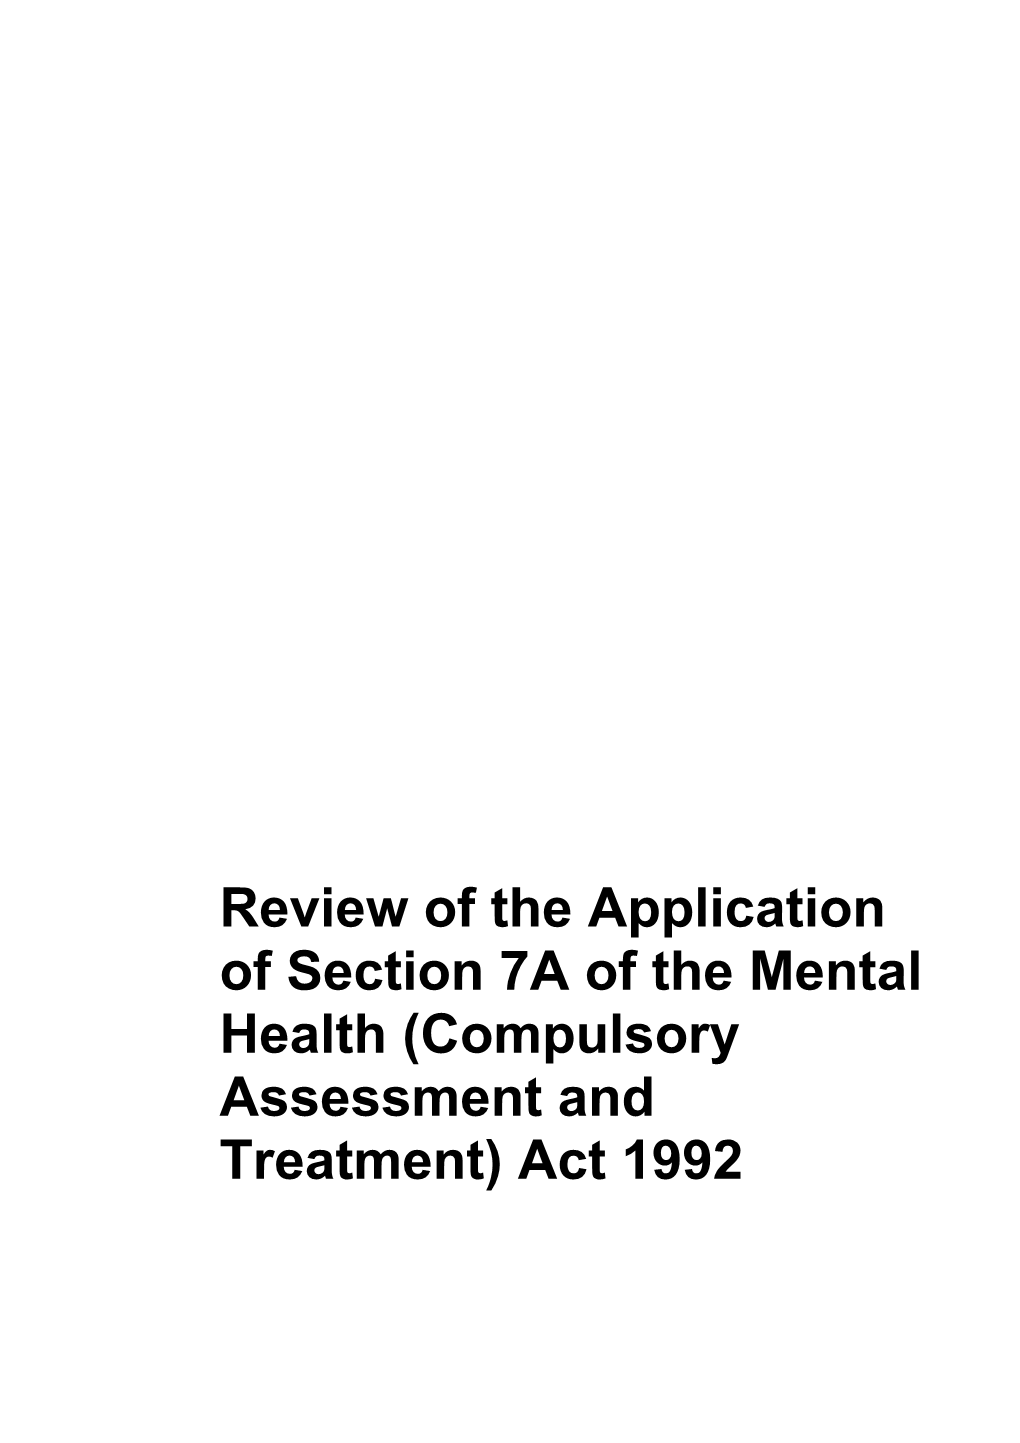 Review of the Application of Section 7A of the Mental Health (Compulsory Assessment And